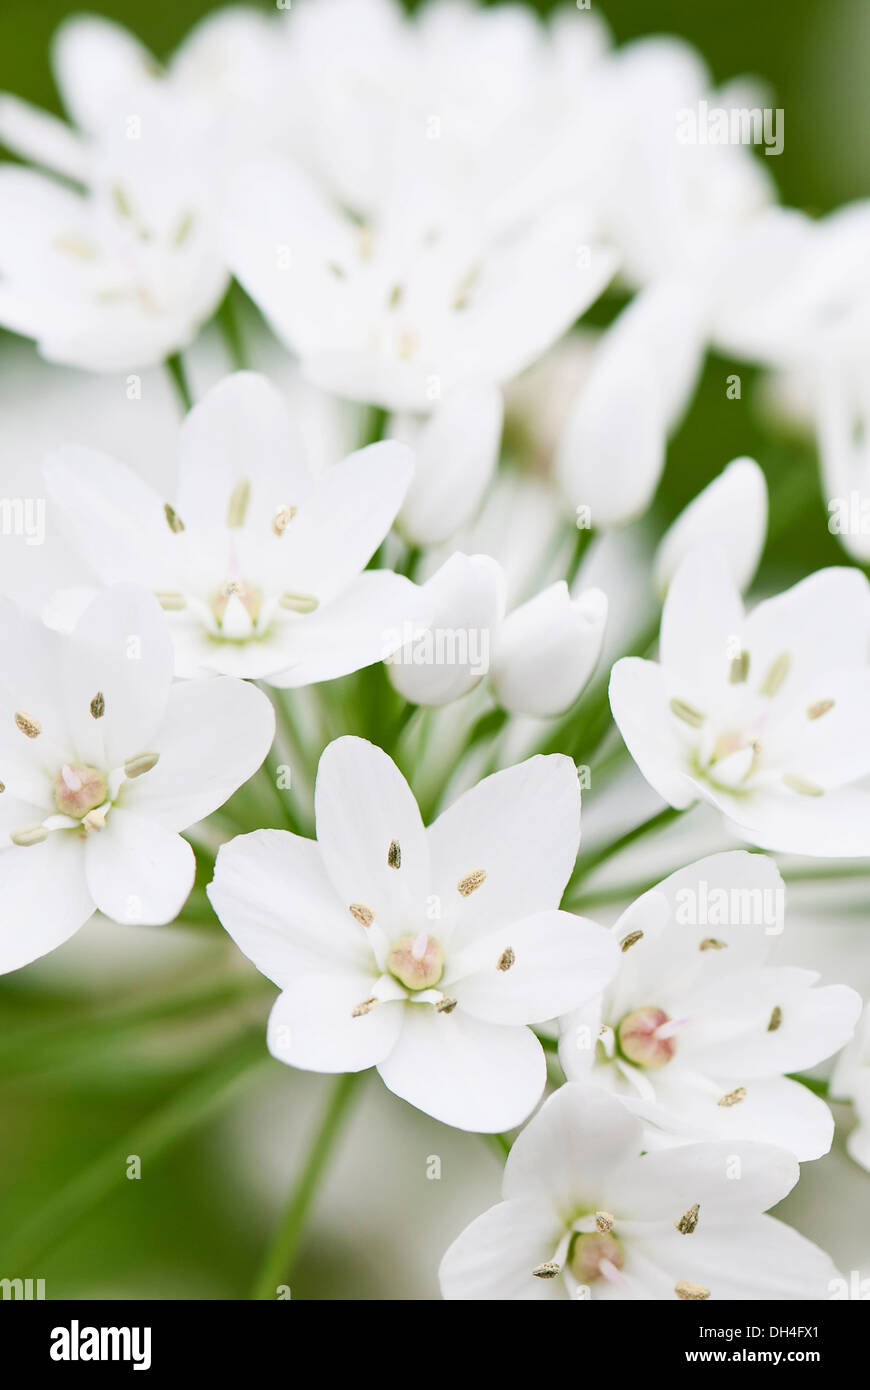 Star-of-Bethlehem, Ornithogalum thyrsoides. Close view of clustered, white, star-shaped flowers. Stock Photo